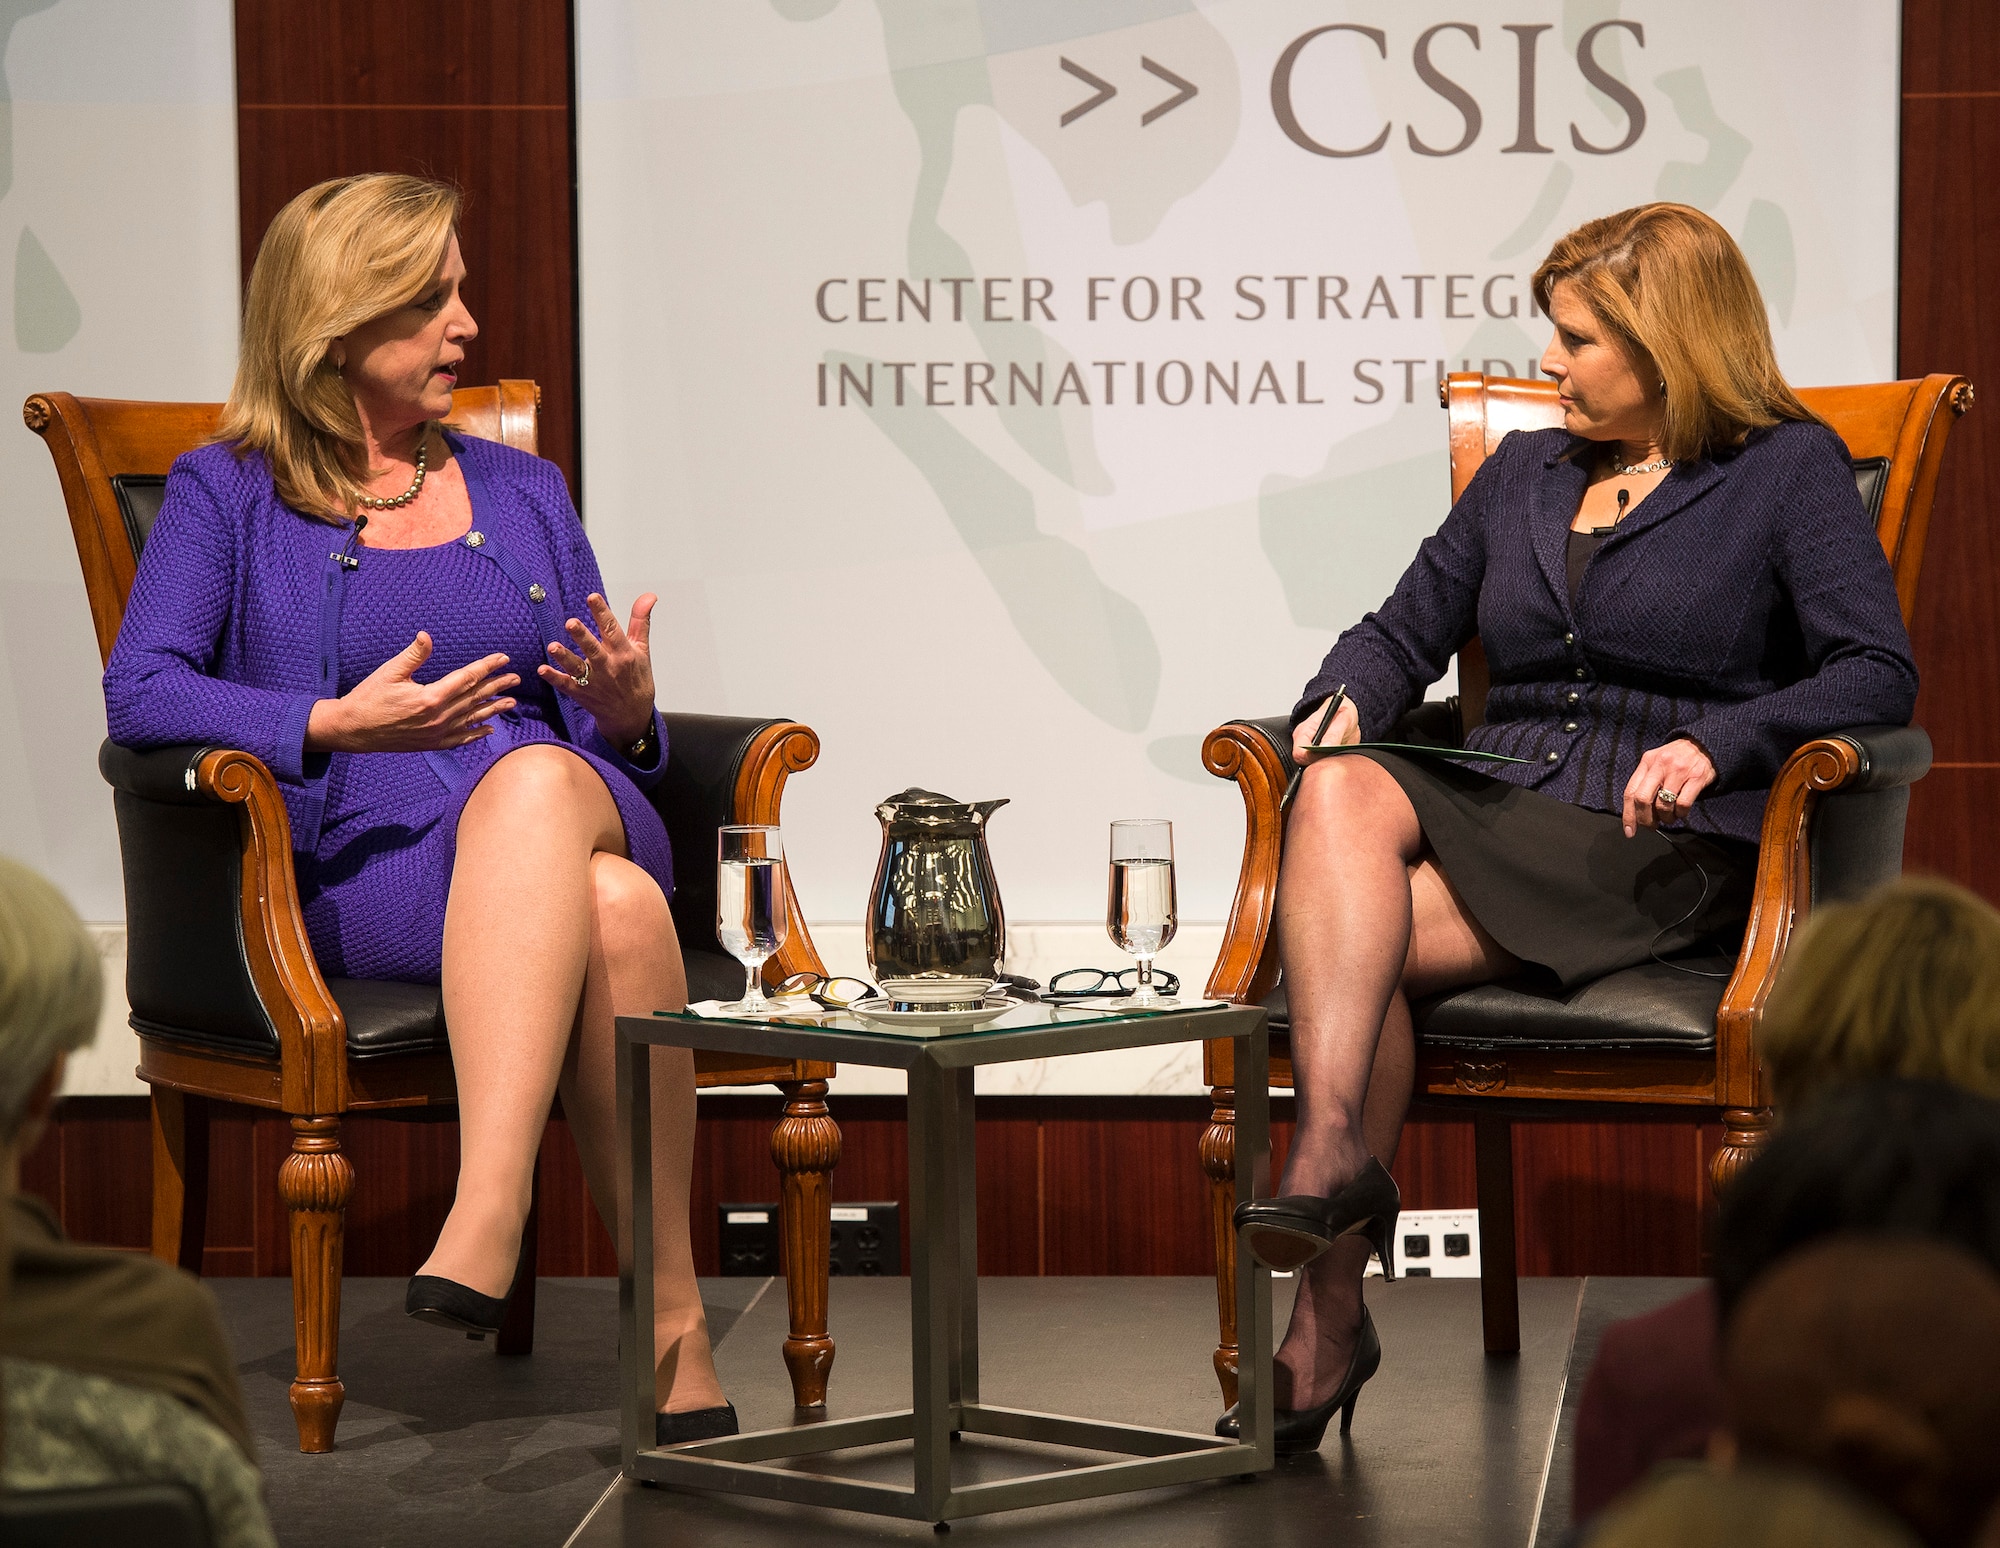 Air Force Secretary Deborah Lee James participates in a moderated discussion as part of the Center for Strategic and International Studies’ Smart Women Smart Power Initiative in Washington, D.C., Jan. 14, 2015. Moderated by Nina Easton, SWSP convenes top-level women leaders to discuss critical and timely issues in their respective fields, reflect on their professional experiences and share ideas and insights. (U.S. Air Force photo/Jim Varhegyi)